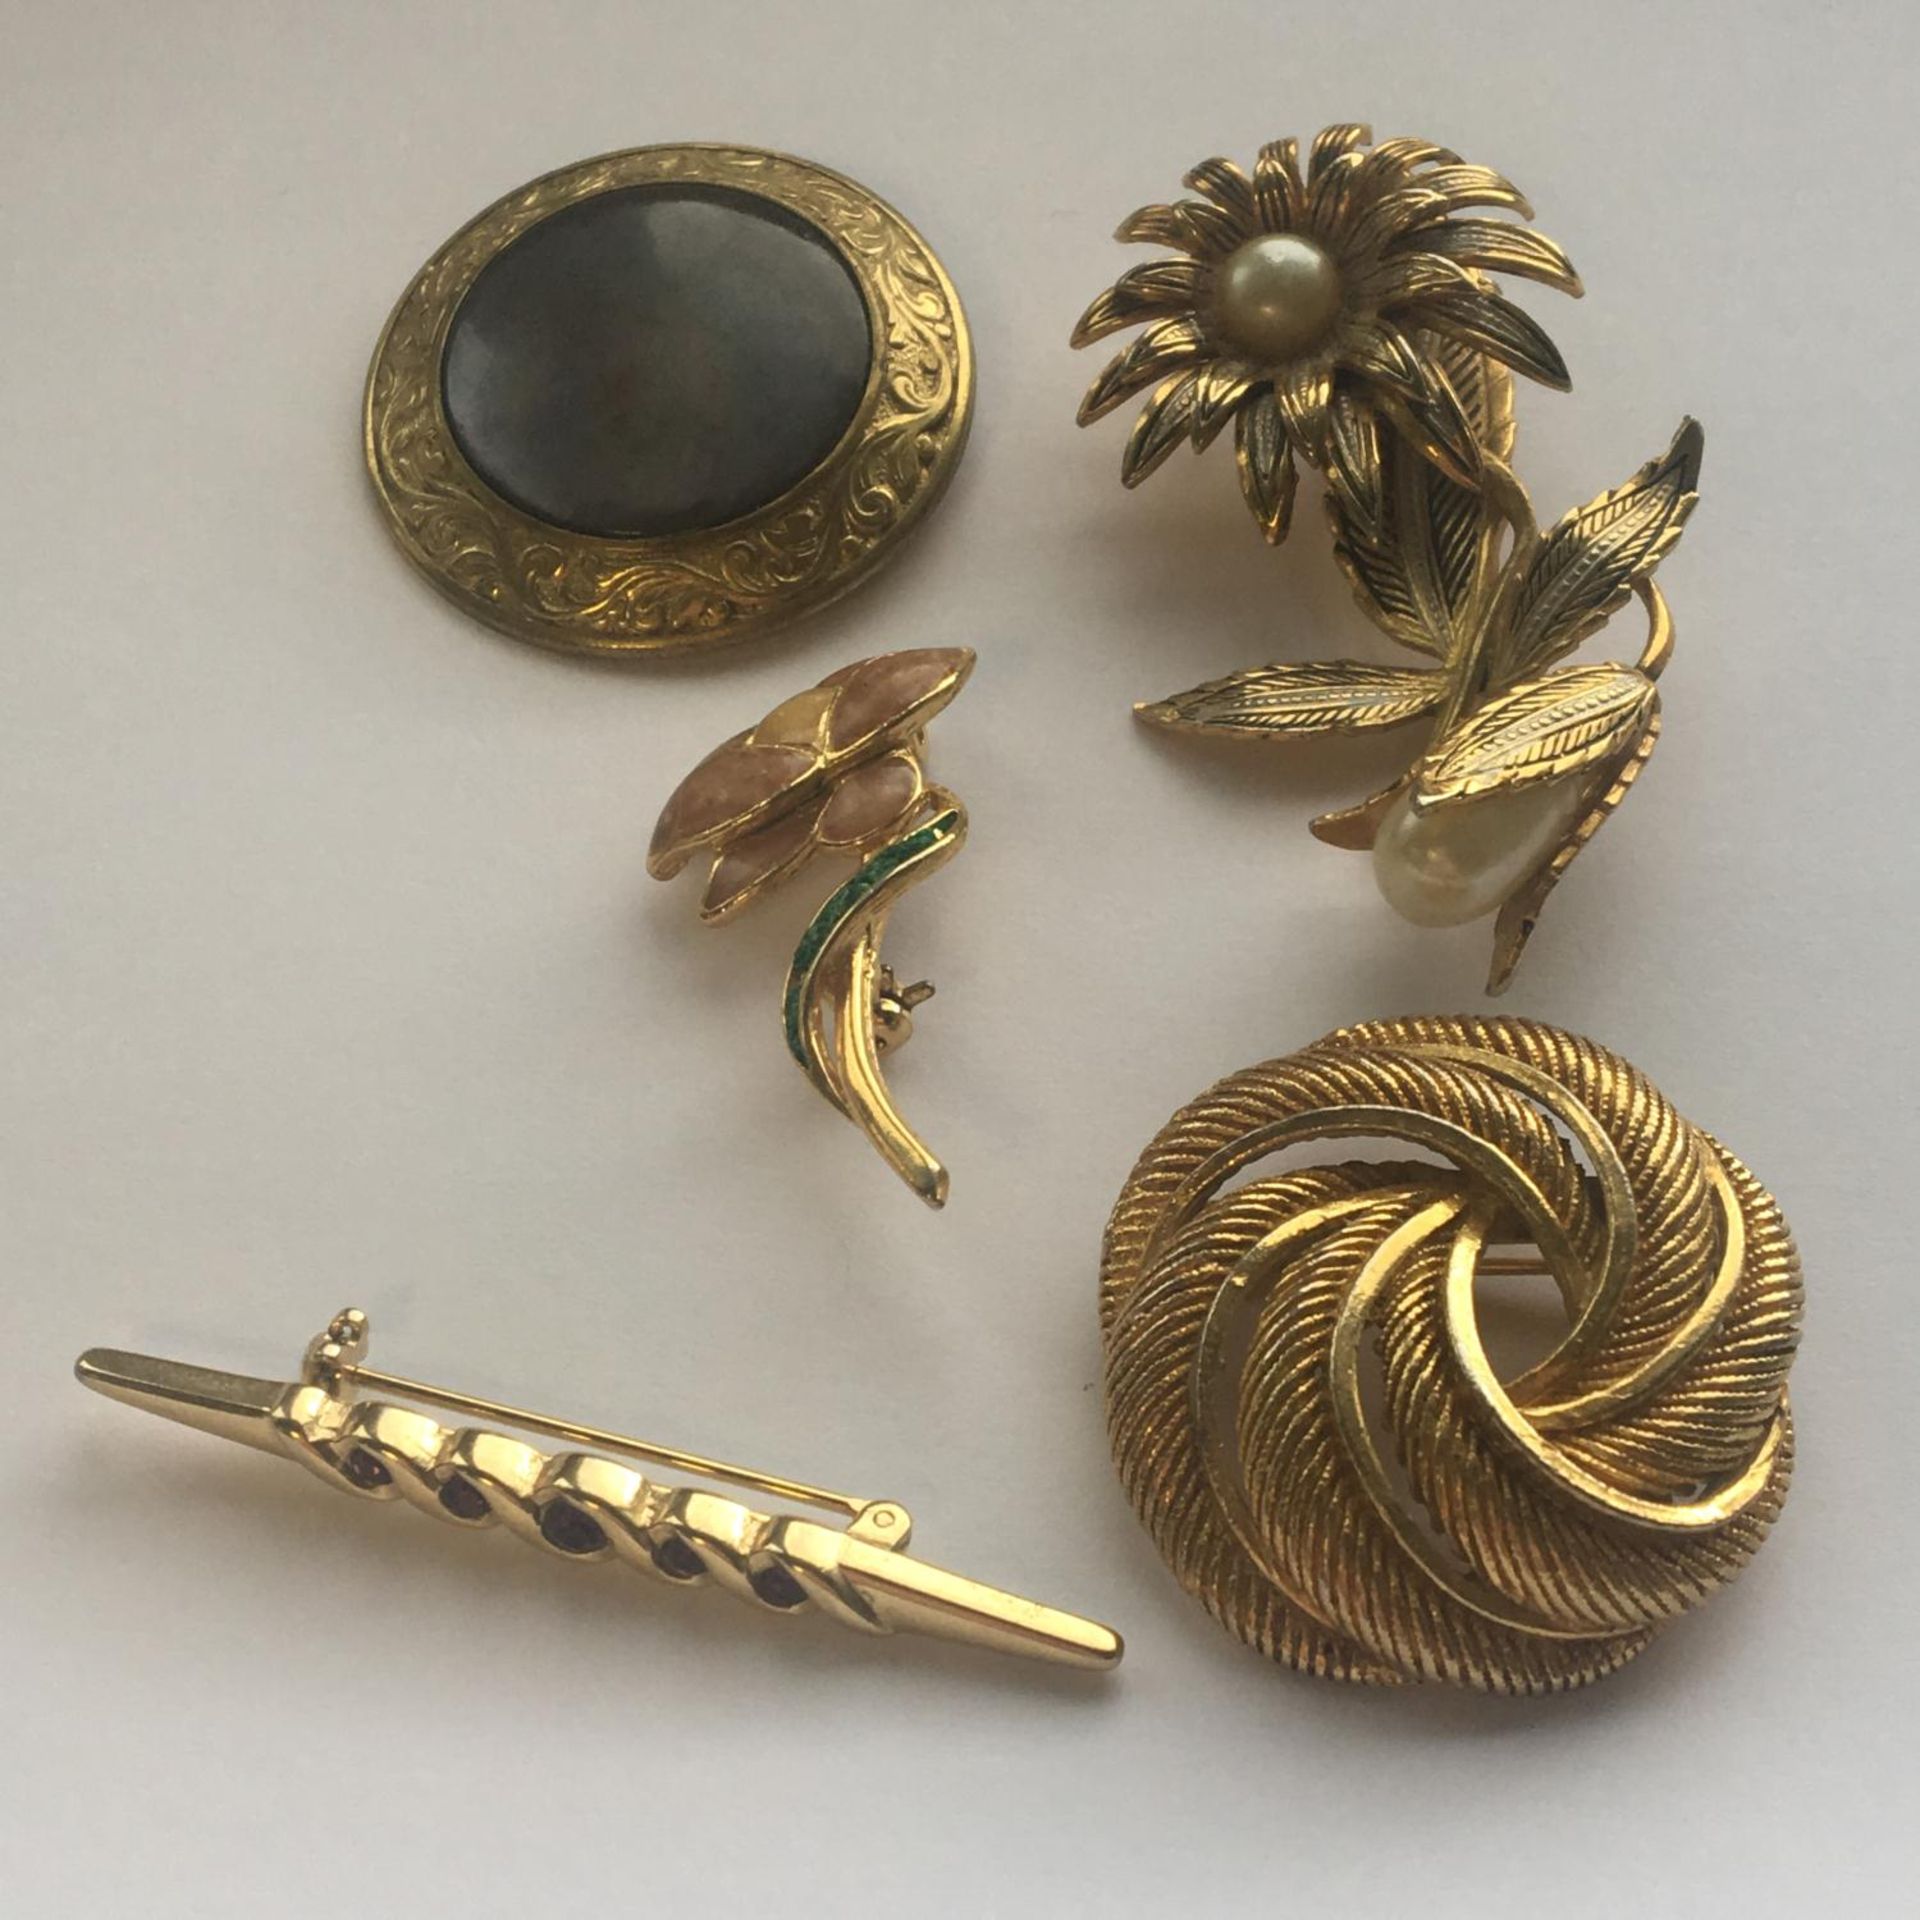 Assorted vintage brooches to include a Damascene brooch stamped Spain. Includes free UK delivery.